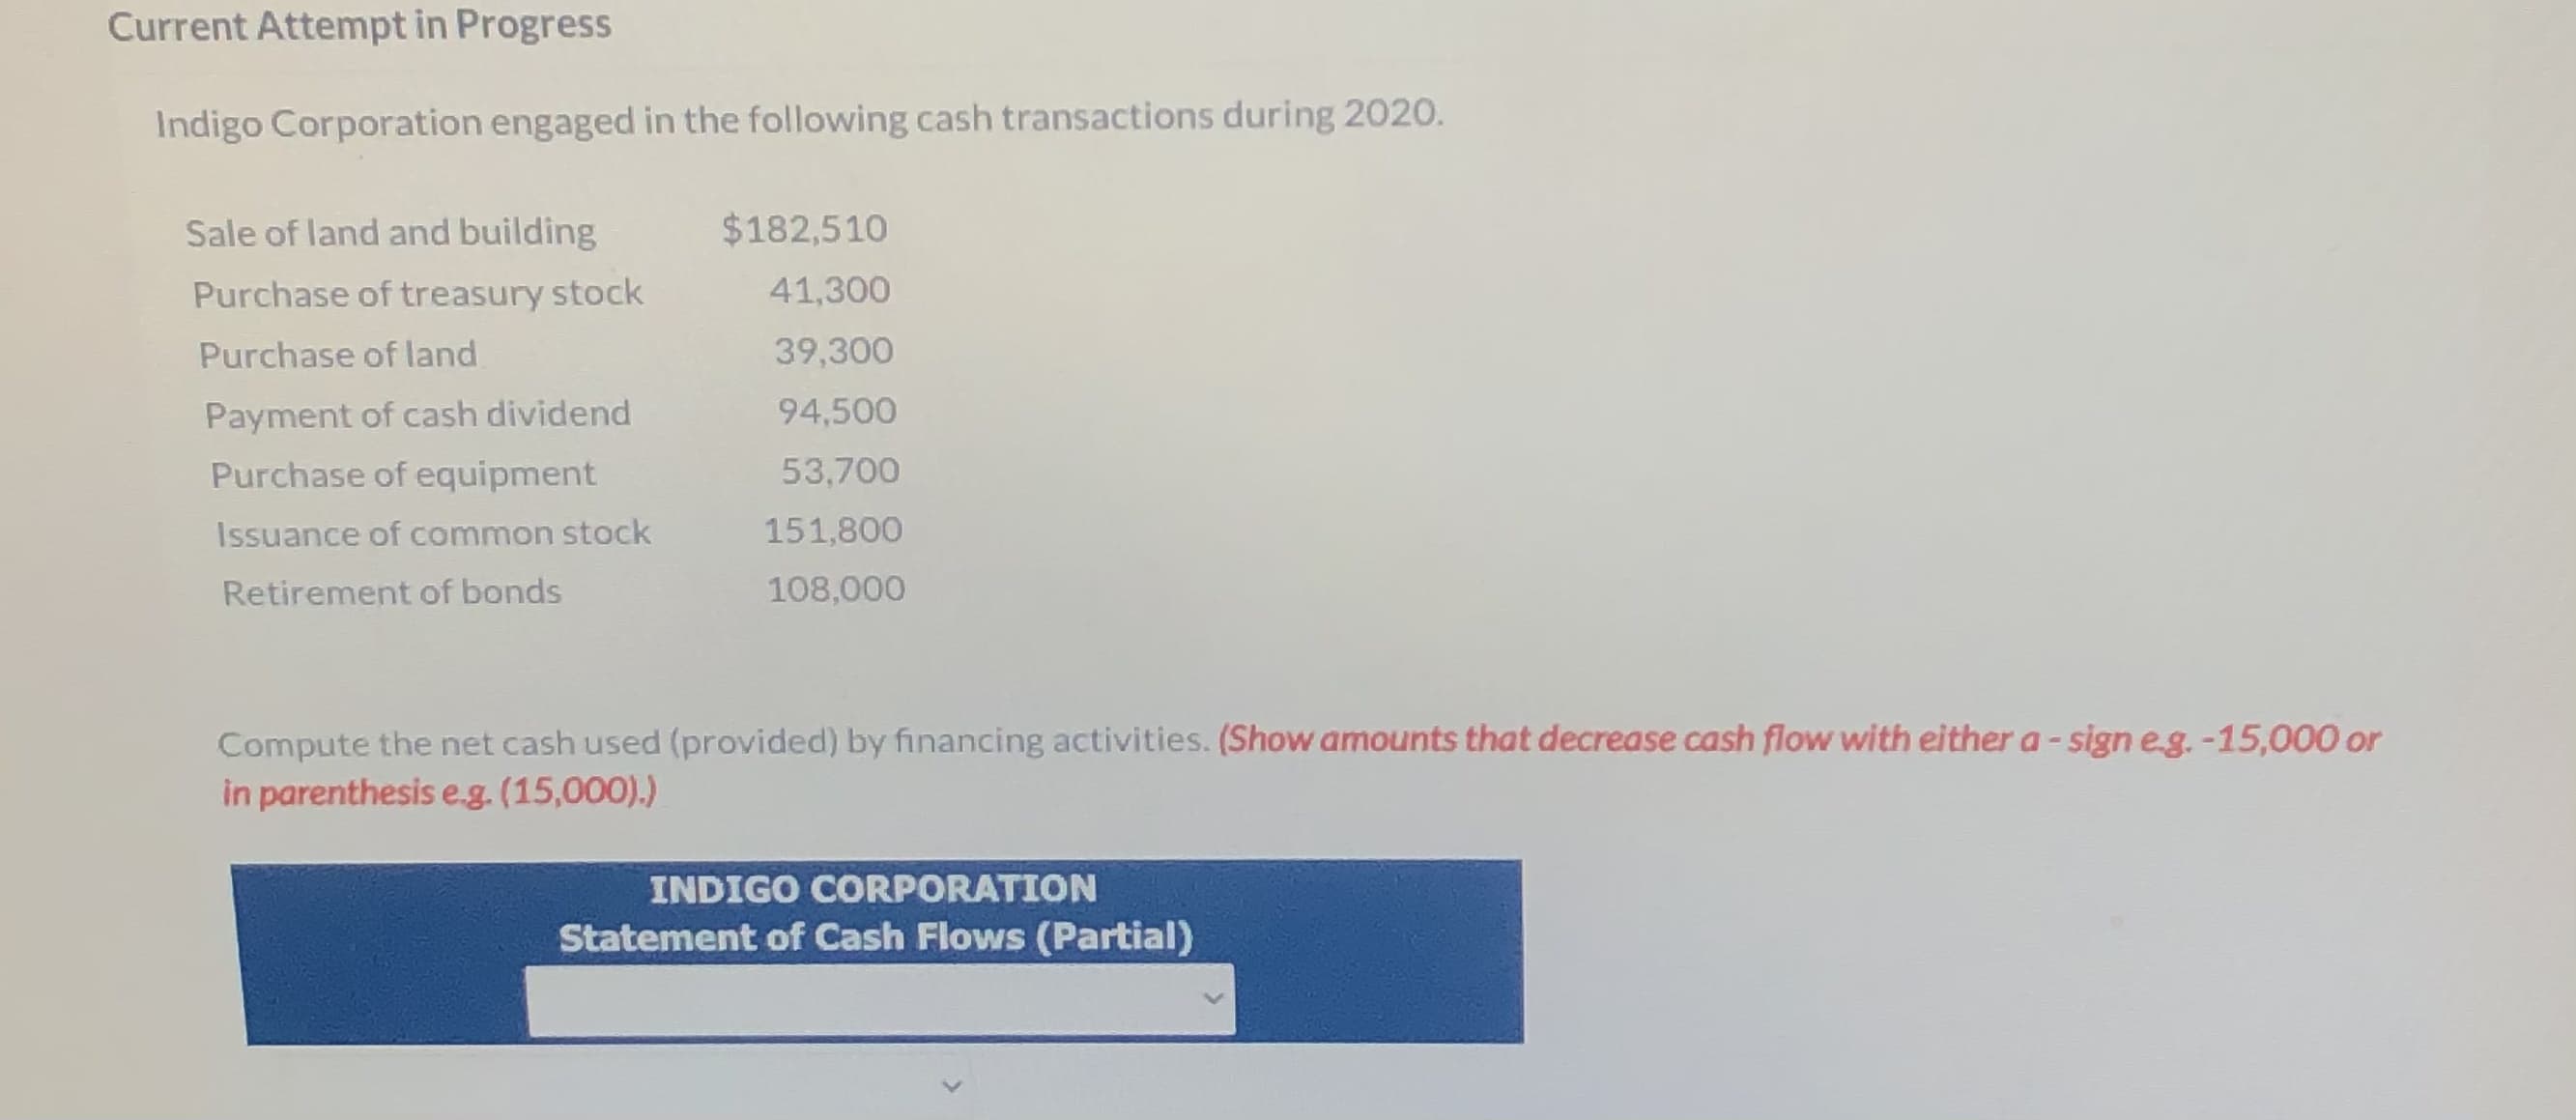 Indigo Corporation engaged in the following cash transactions during 2020.
Sale of land and building
$182,510
Purchase of treasury stock
41,300
Purchase of land
39,300
Payment of cash dividend
94,500
Purchase of equipment
53,700
Issuance of common stock
151,800
Retirement of bonds
108,000
Compute the net cash used (provided) by financing activities. (Show amounts that decrease cash flow with either a- sign eg.-15,000 or
in parenthesis e.g. (15,000).)
